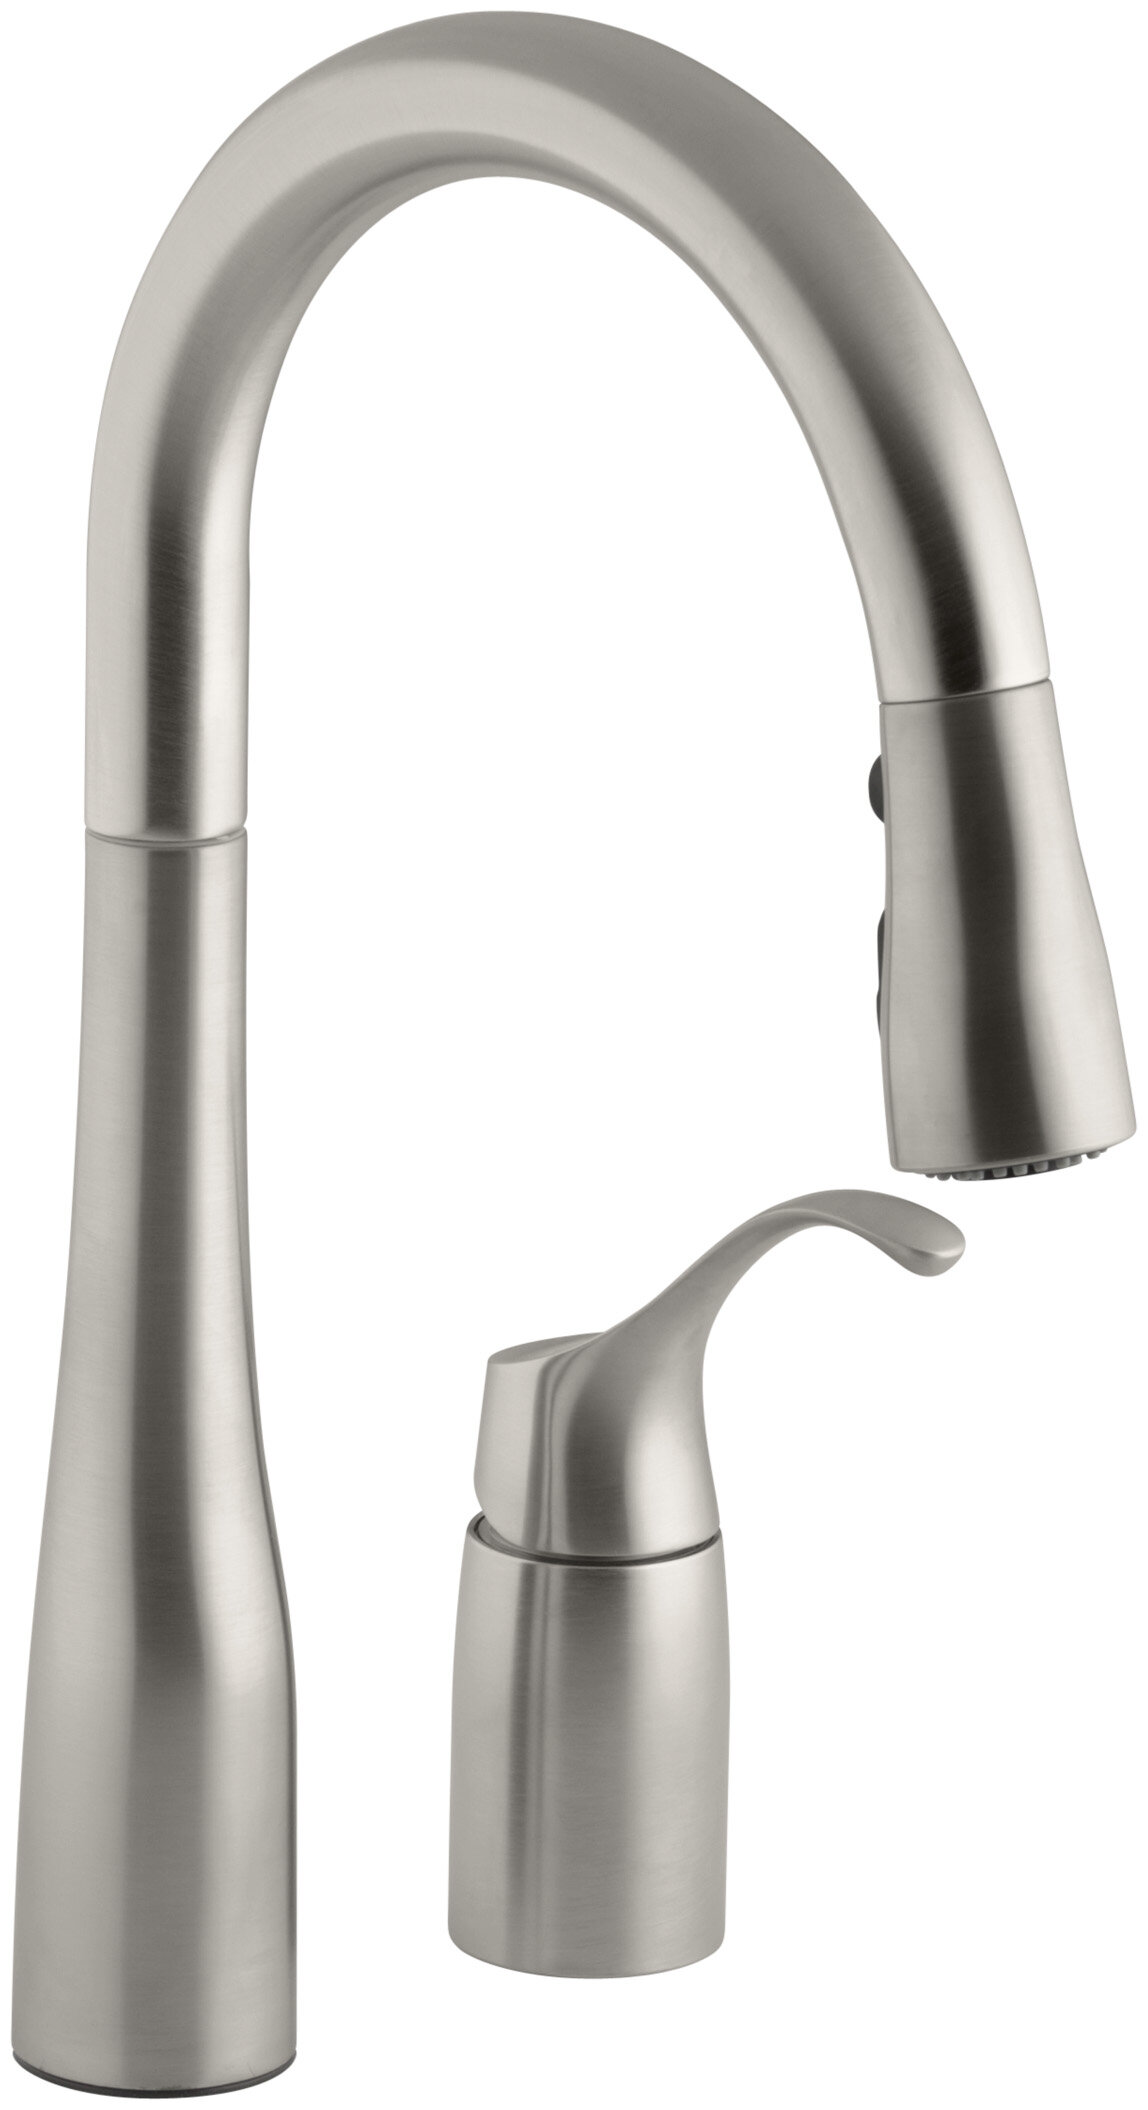 Simplice Two Hole Kitchen Sink Faucet With 14 3 4 Pull Down Swing